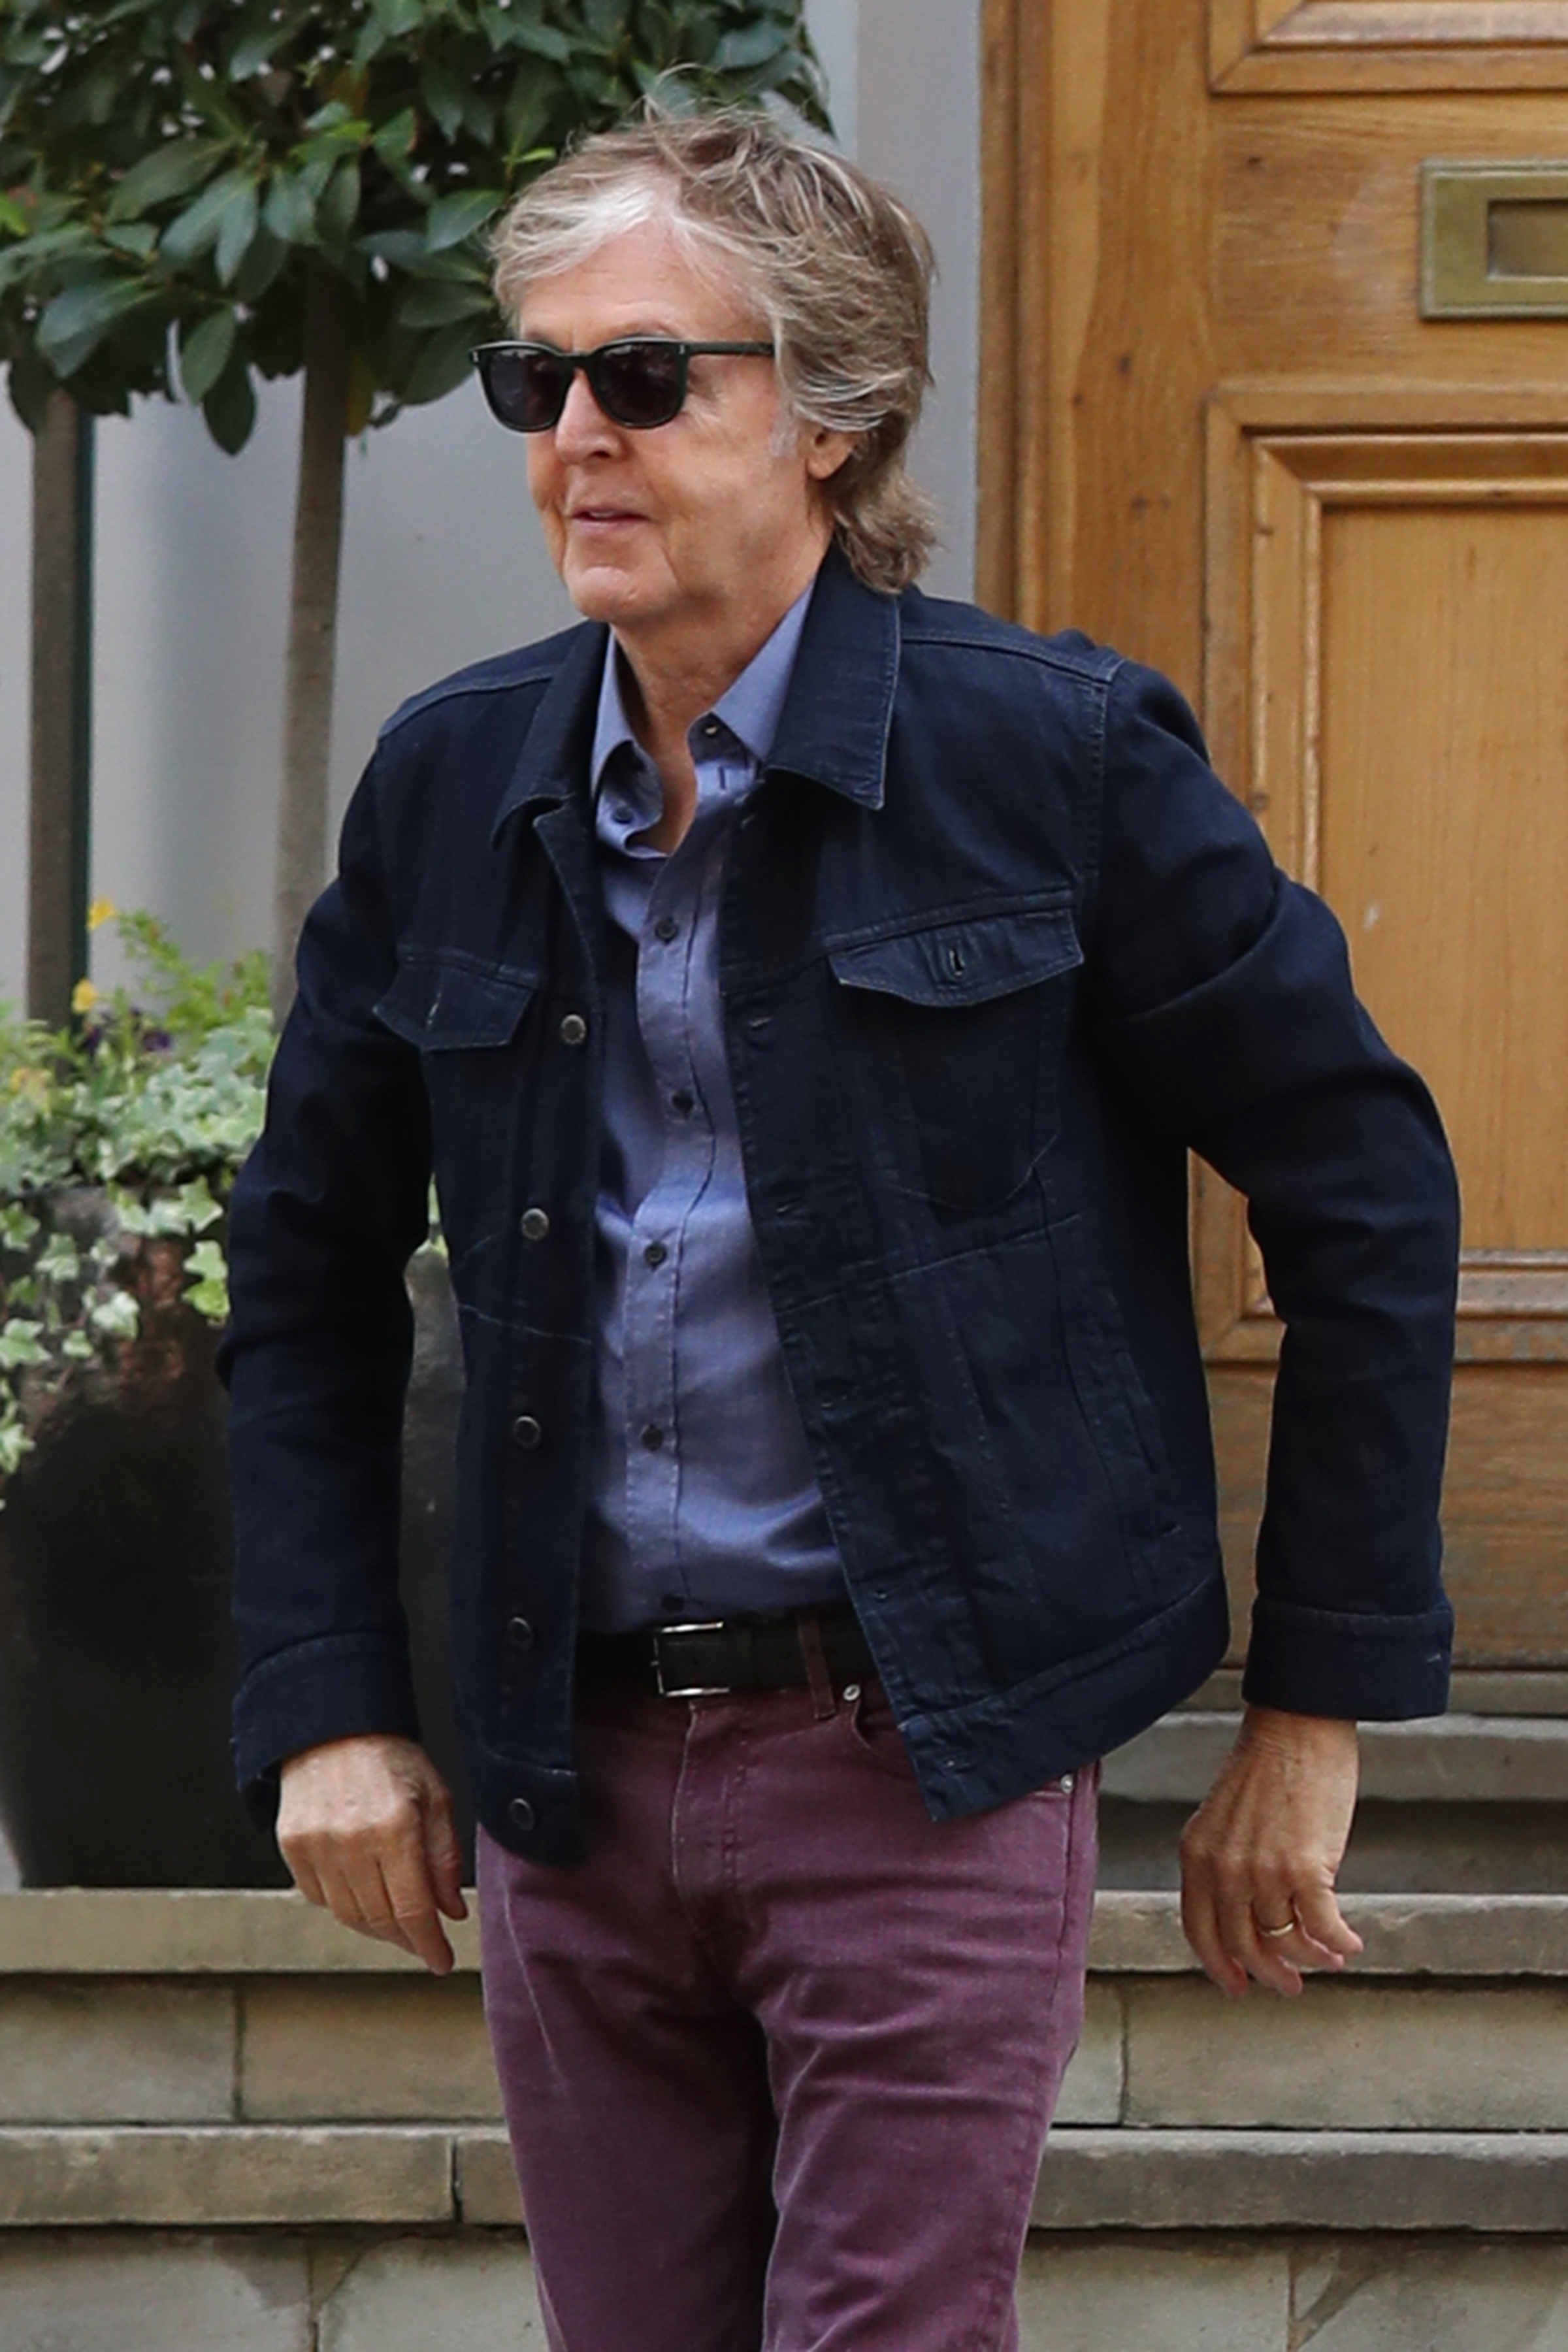 Paul McCartney seen leaving the Abbey Road Studios after performing a secret gig in London, England, on July 23, 2018. | Source: Getty Images